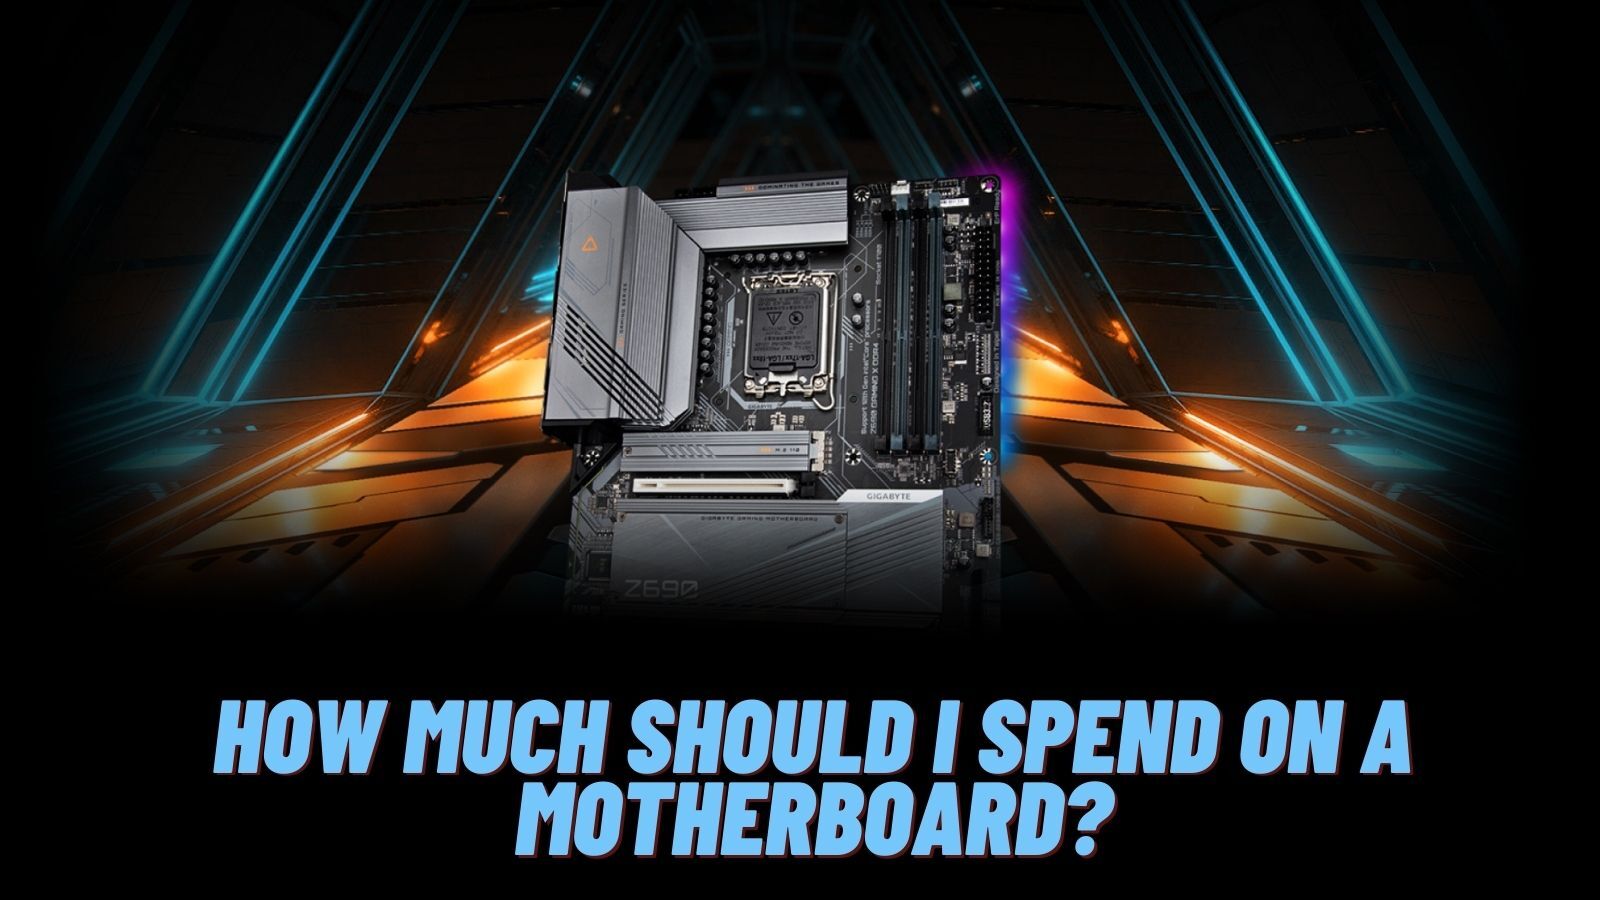 How Much Should I Spend On A Motherboard?